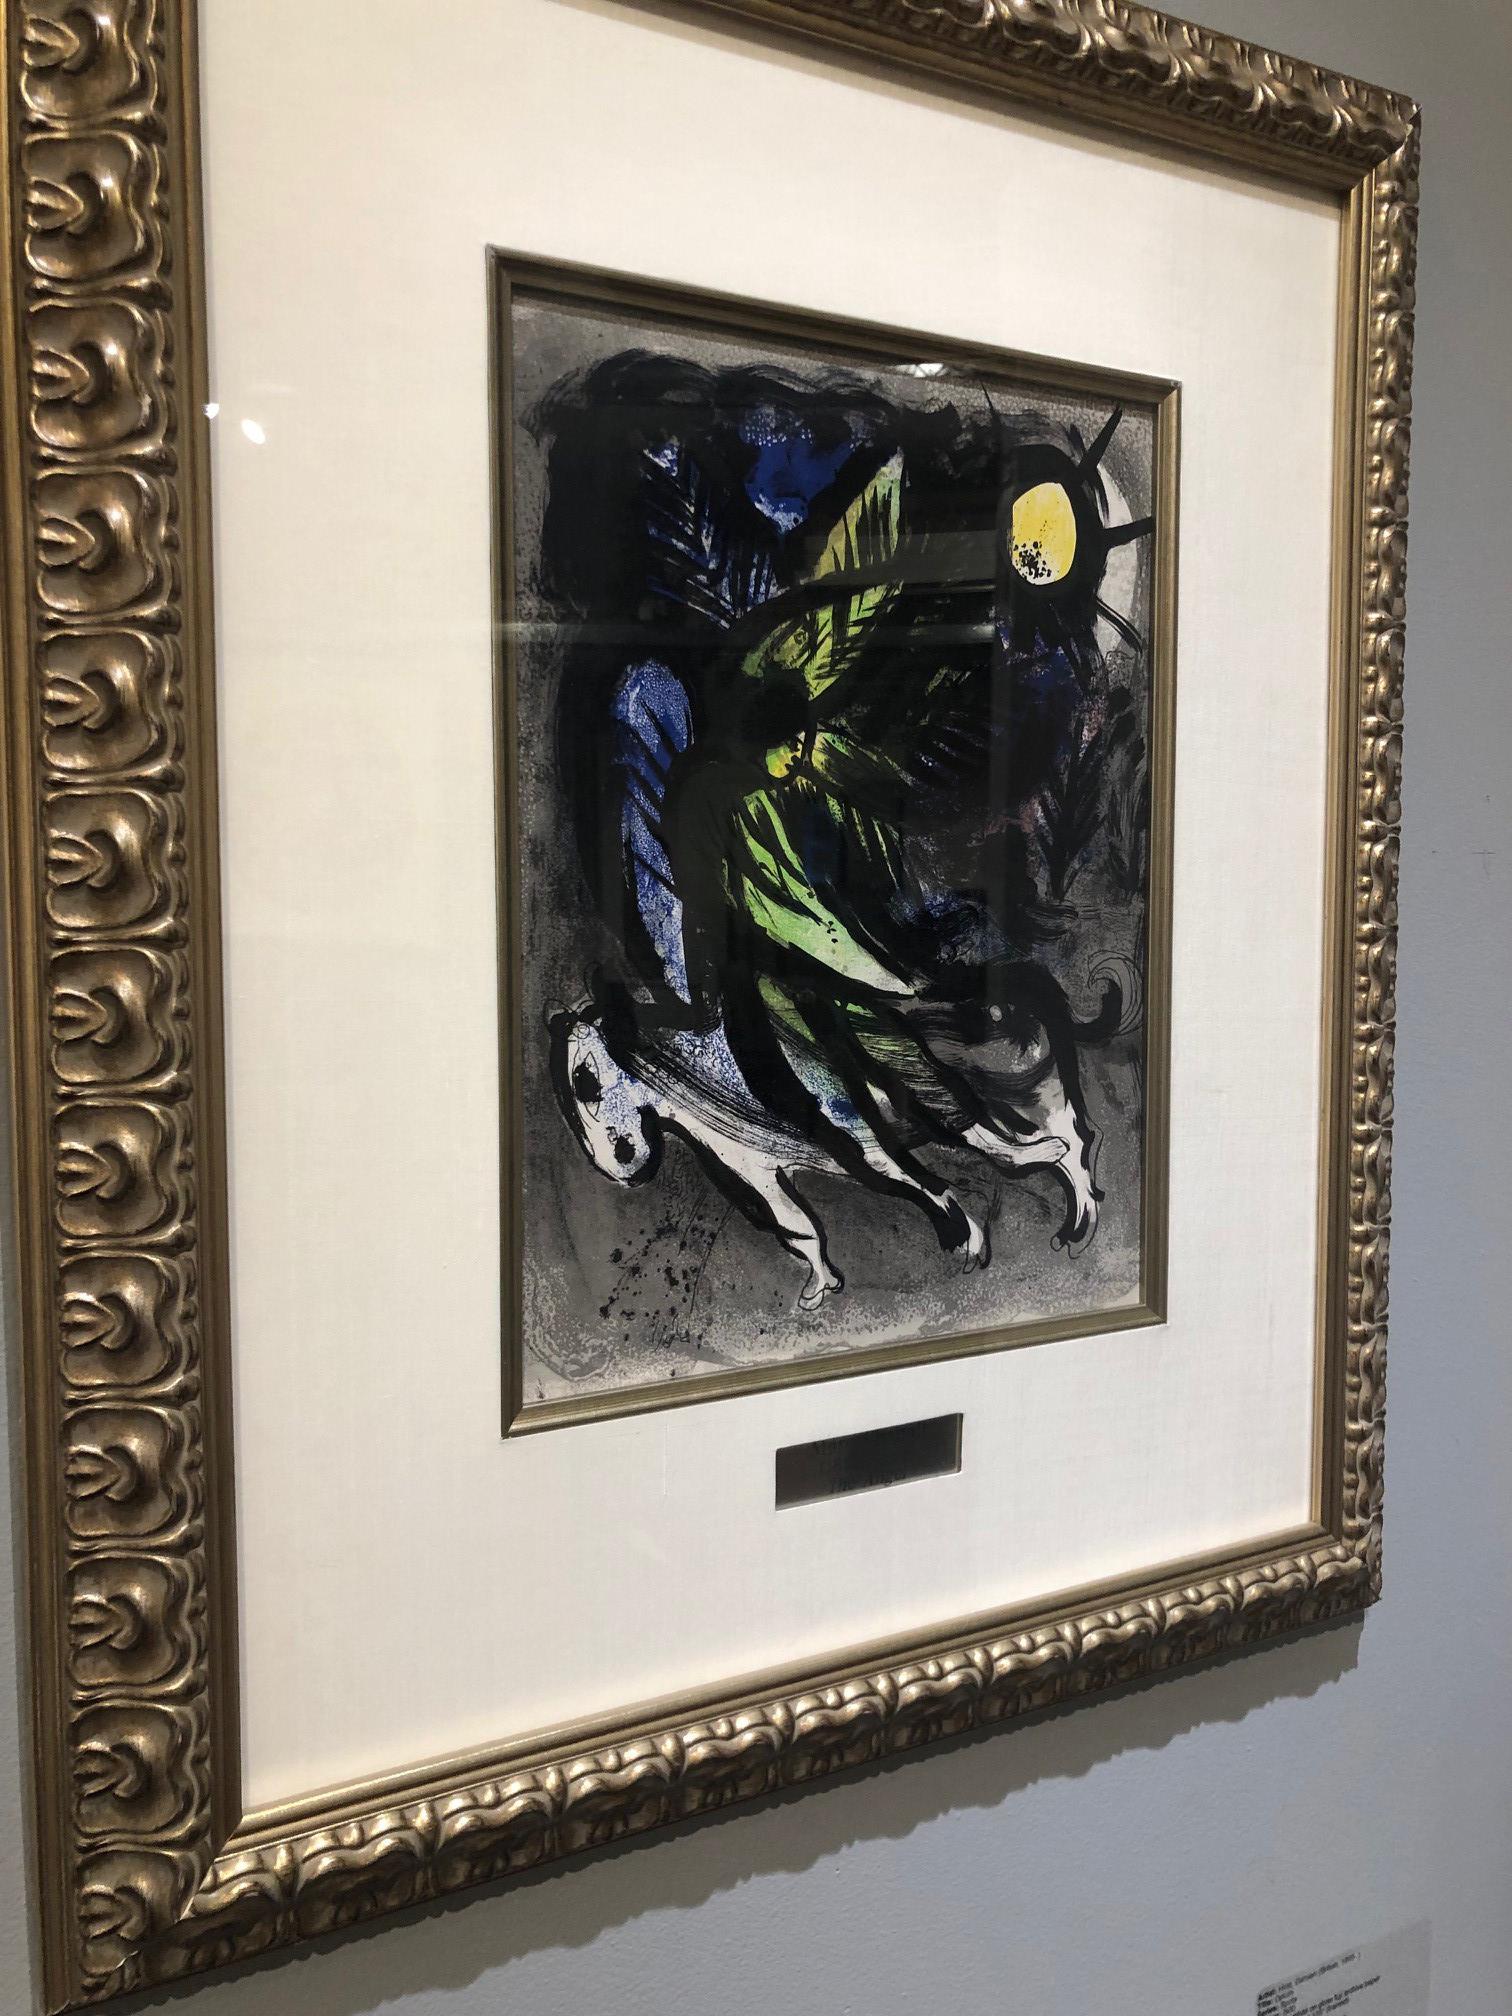 Artist:  Chagall, Marc
Title:  The Angel
Series:  The Lithographs of Chagall Volume I
Date:  1960
Medium:  Lithograph
Framed Dimensions:  23